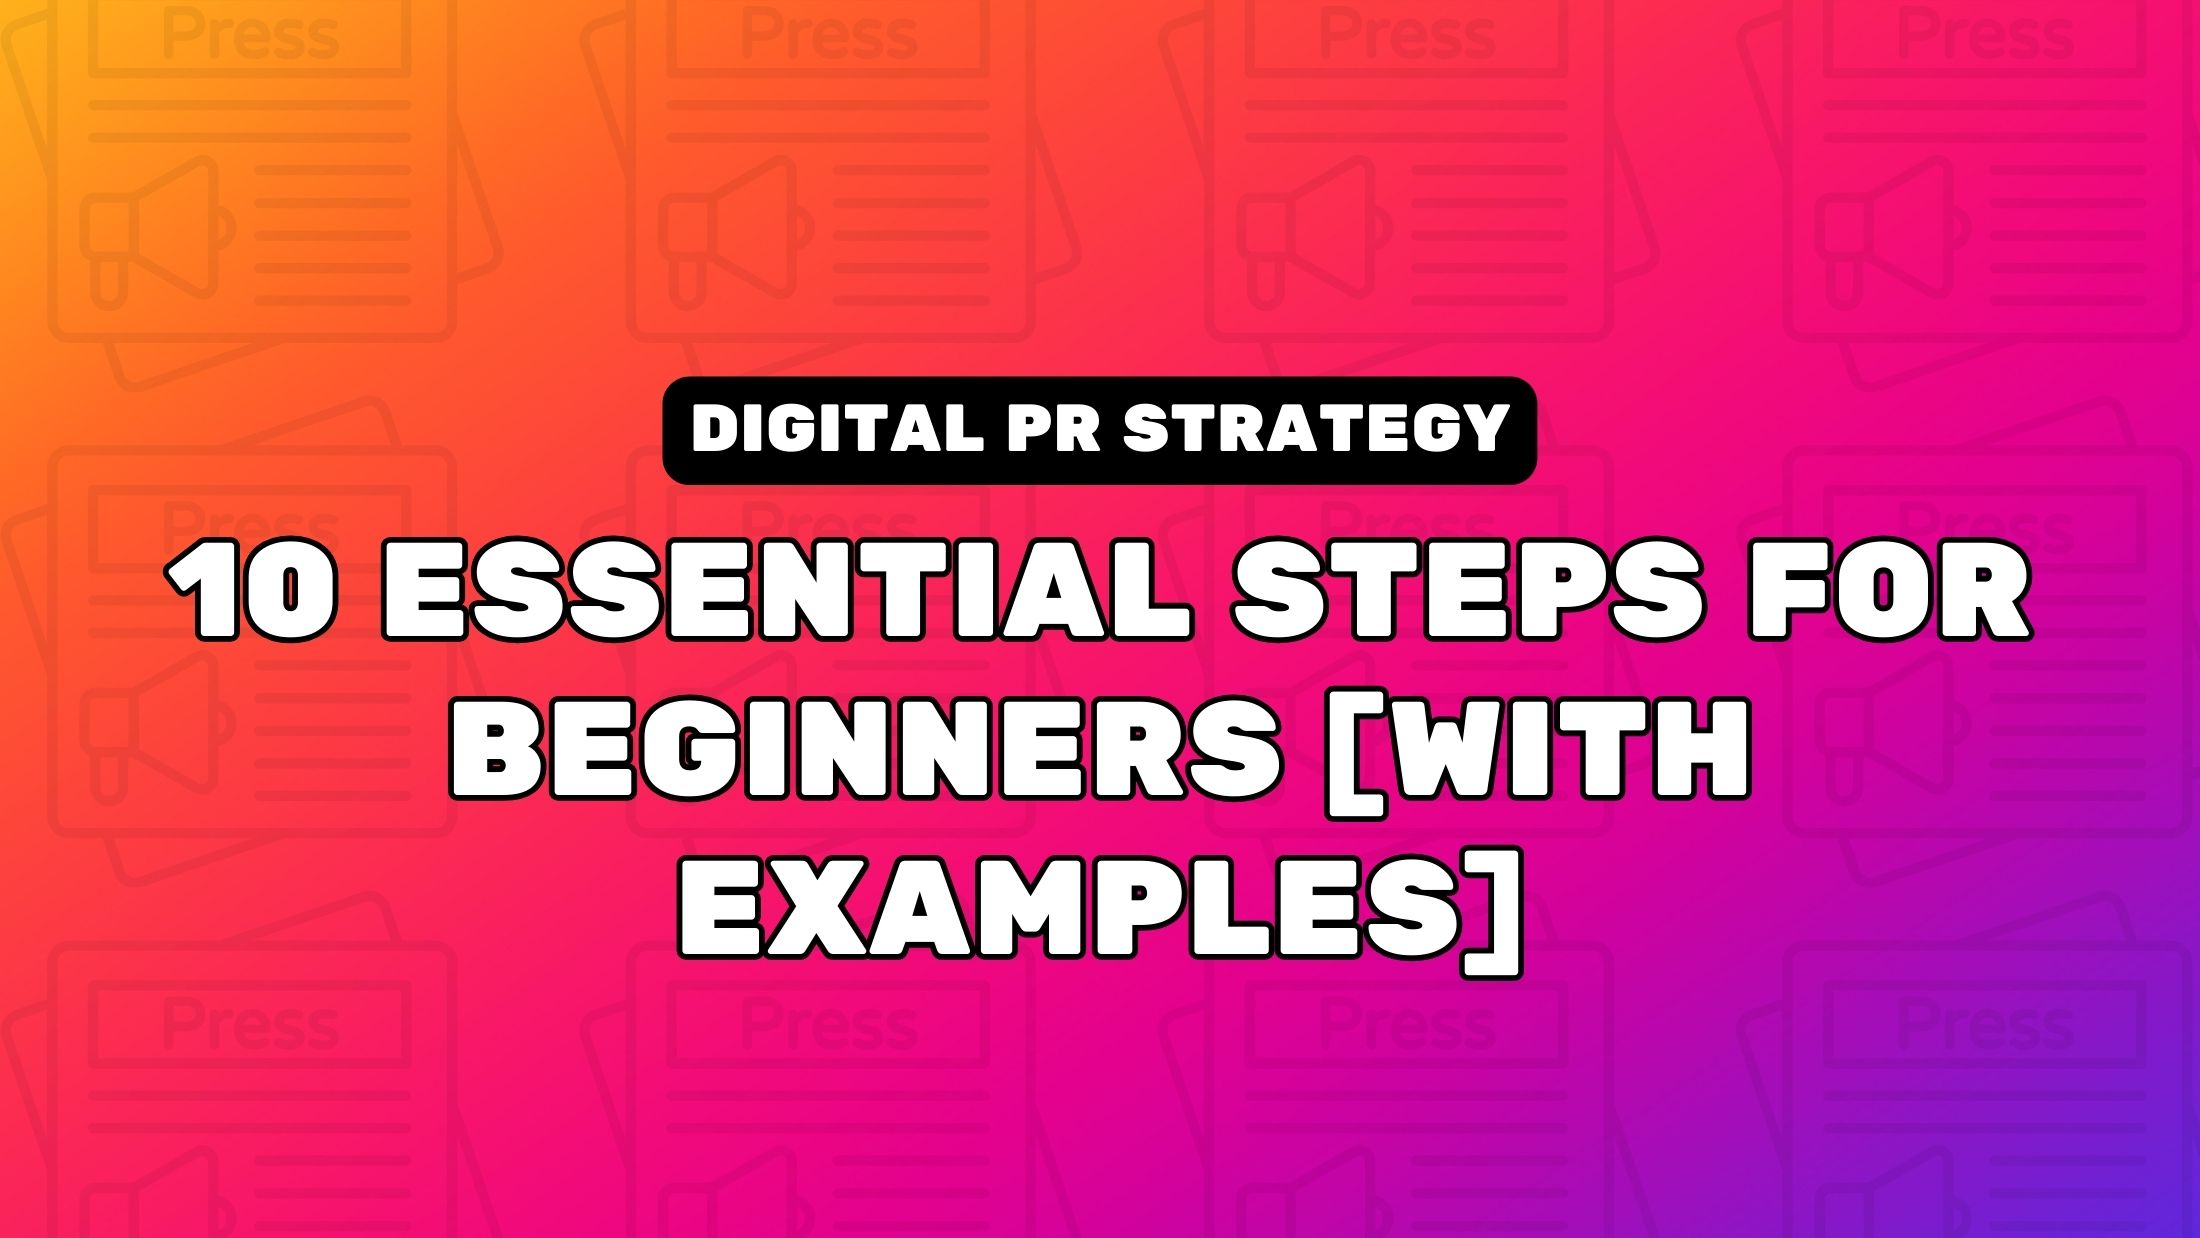 Building A Digital PR Strategy: 10 Essential Steps for Beginners [With Examples]